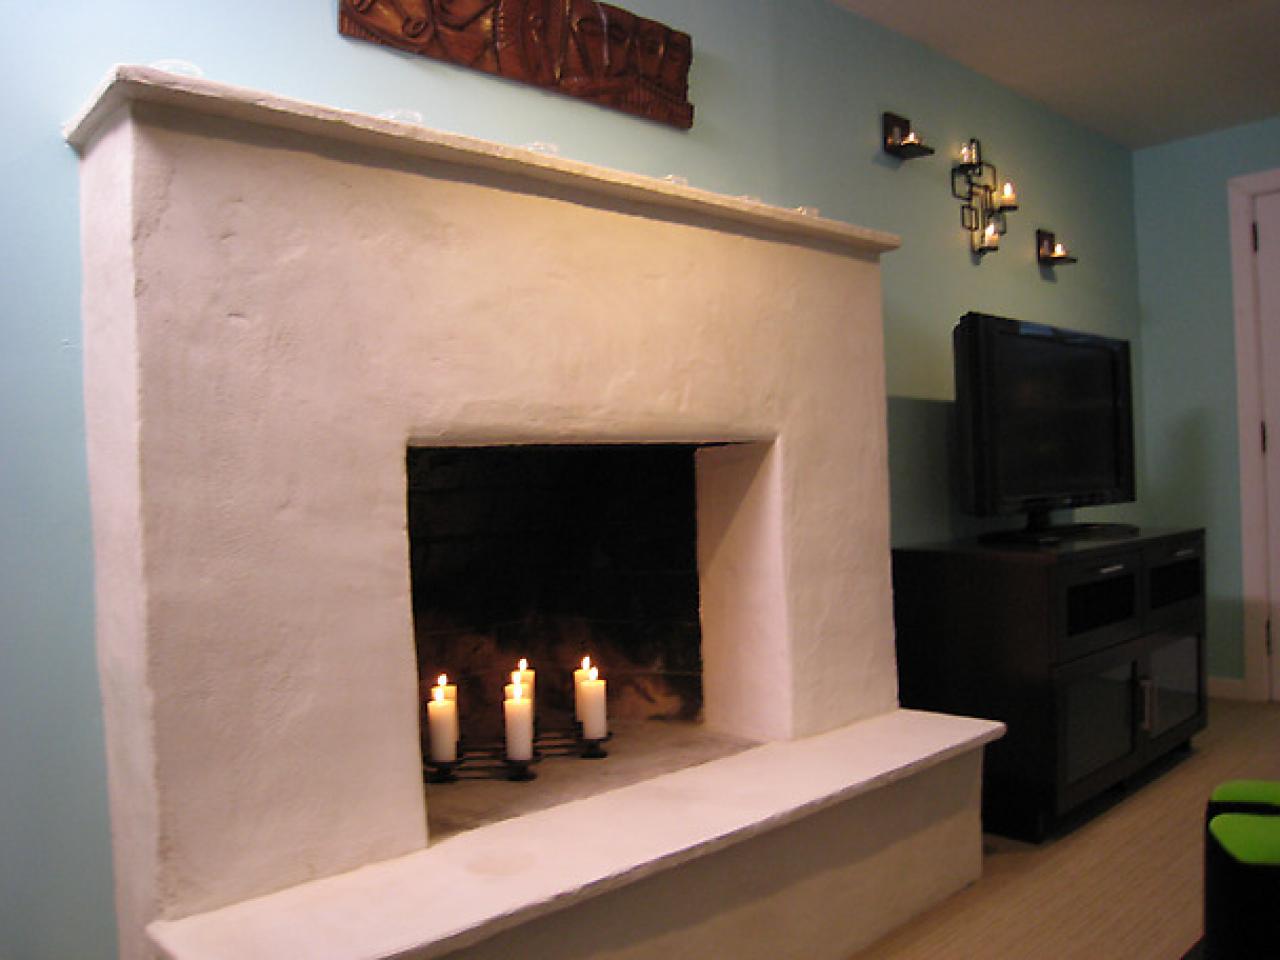 Resurface A Fireplace With Stucco, How To Reface A Fireplace Surround And Hearth